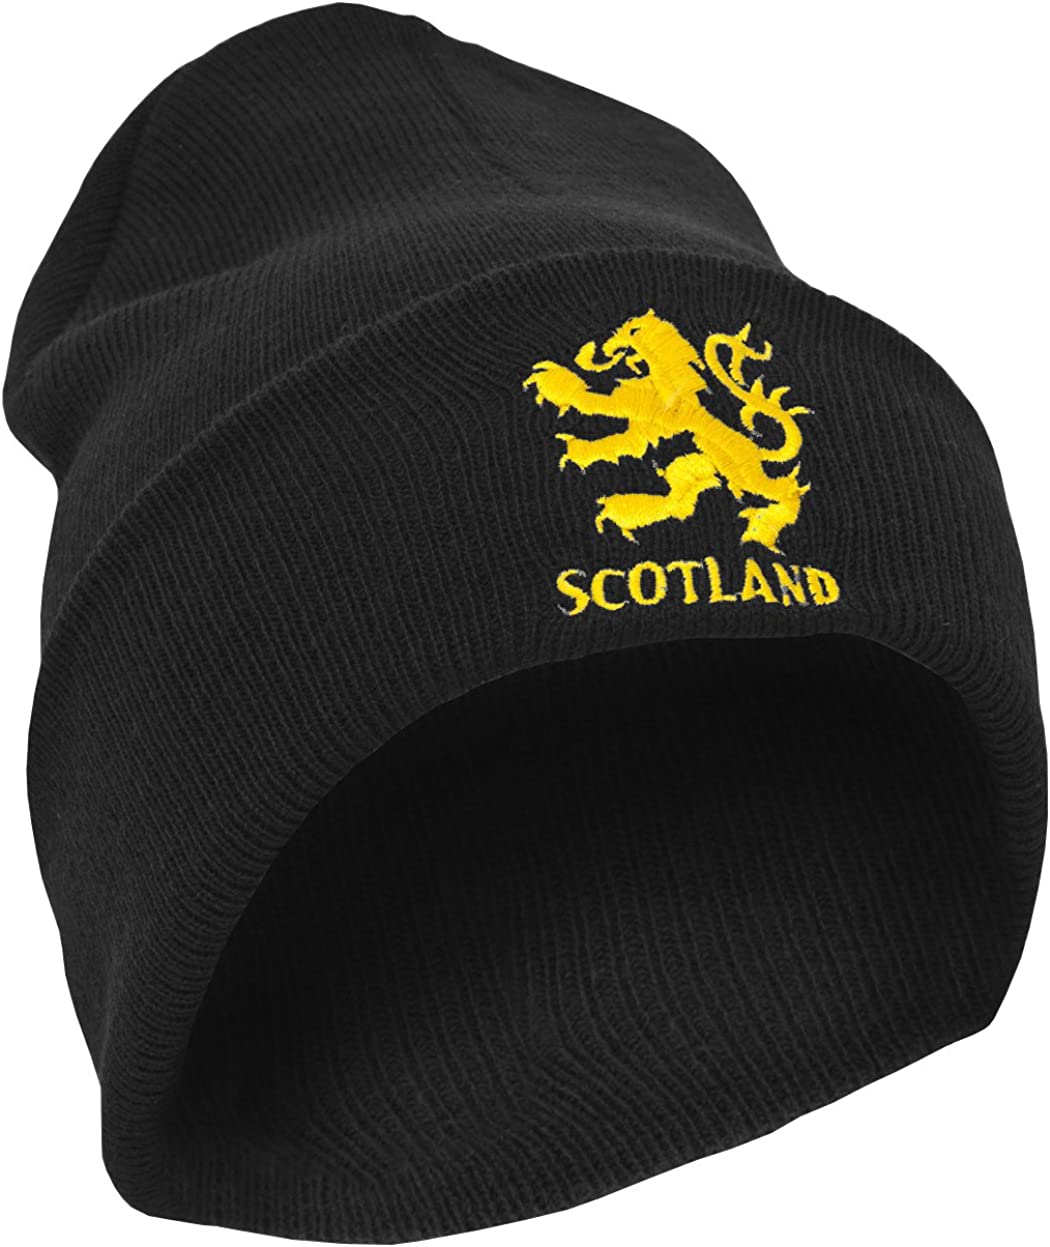 Mens Scotland Lion Design Embroidered Winter Beanie Hat - image 2 of 2